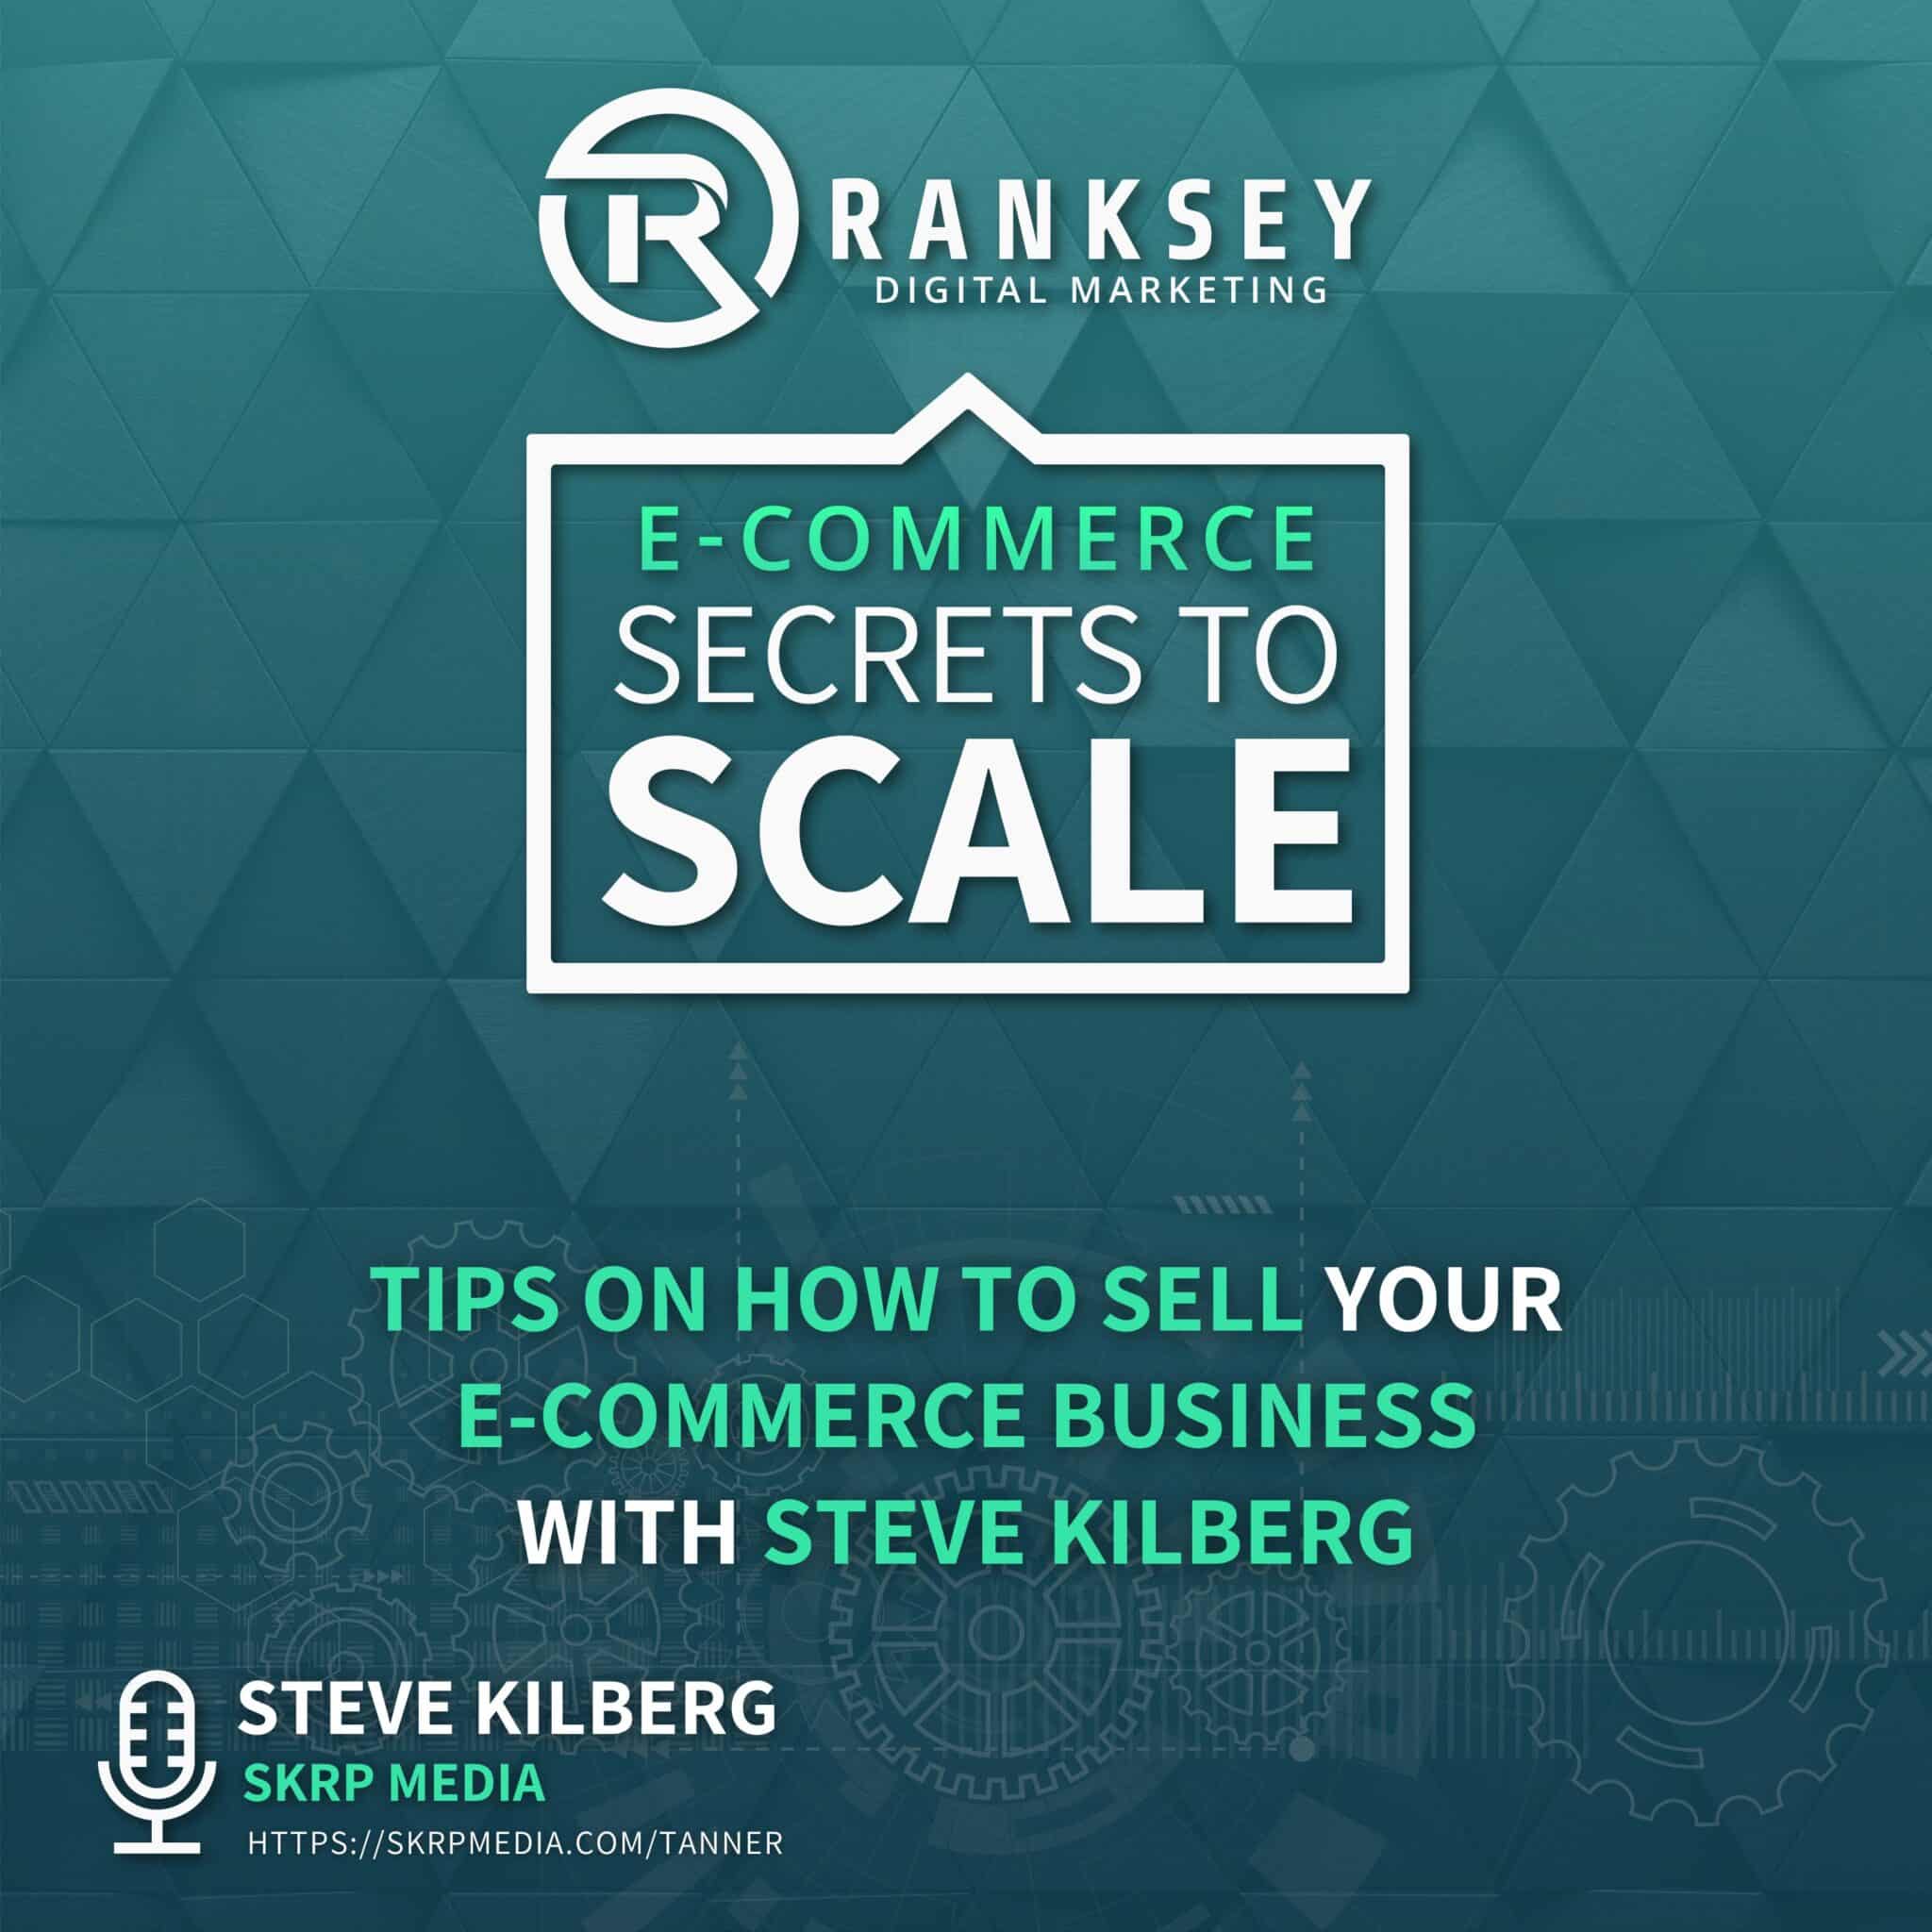 116-Tips-On-How-To-Sell-Your-E-Commerce-Business-With-Steve-Kilberg-scaled